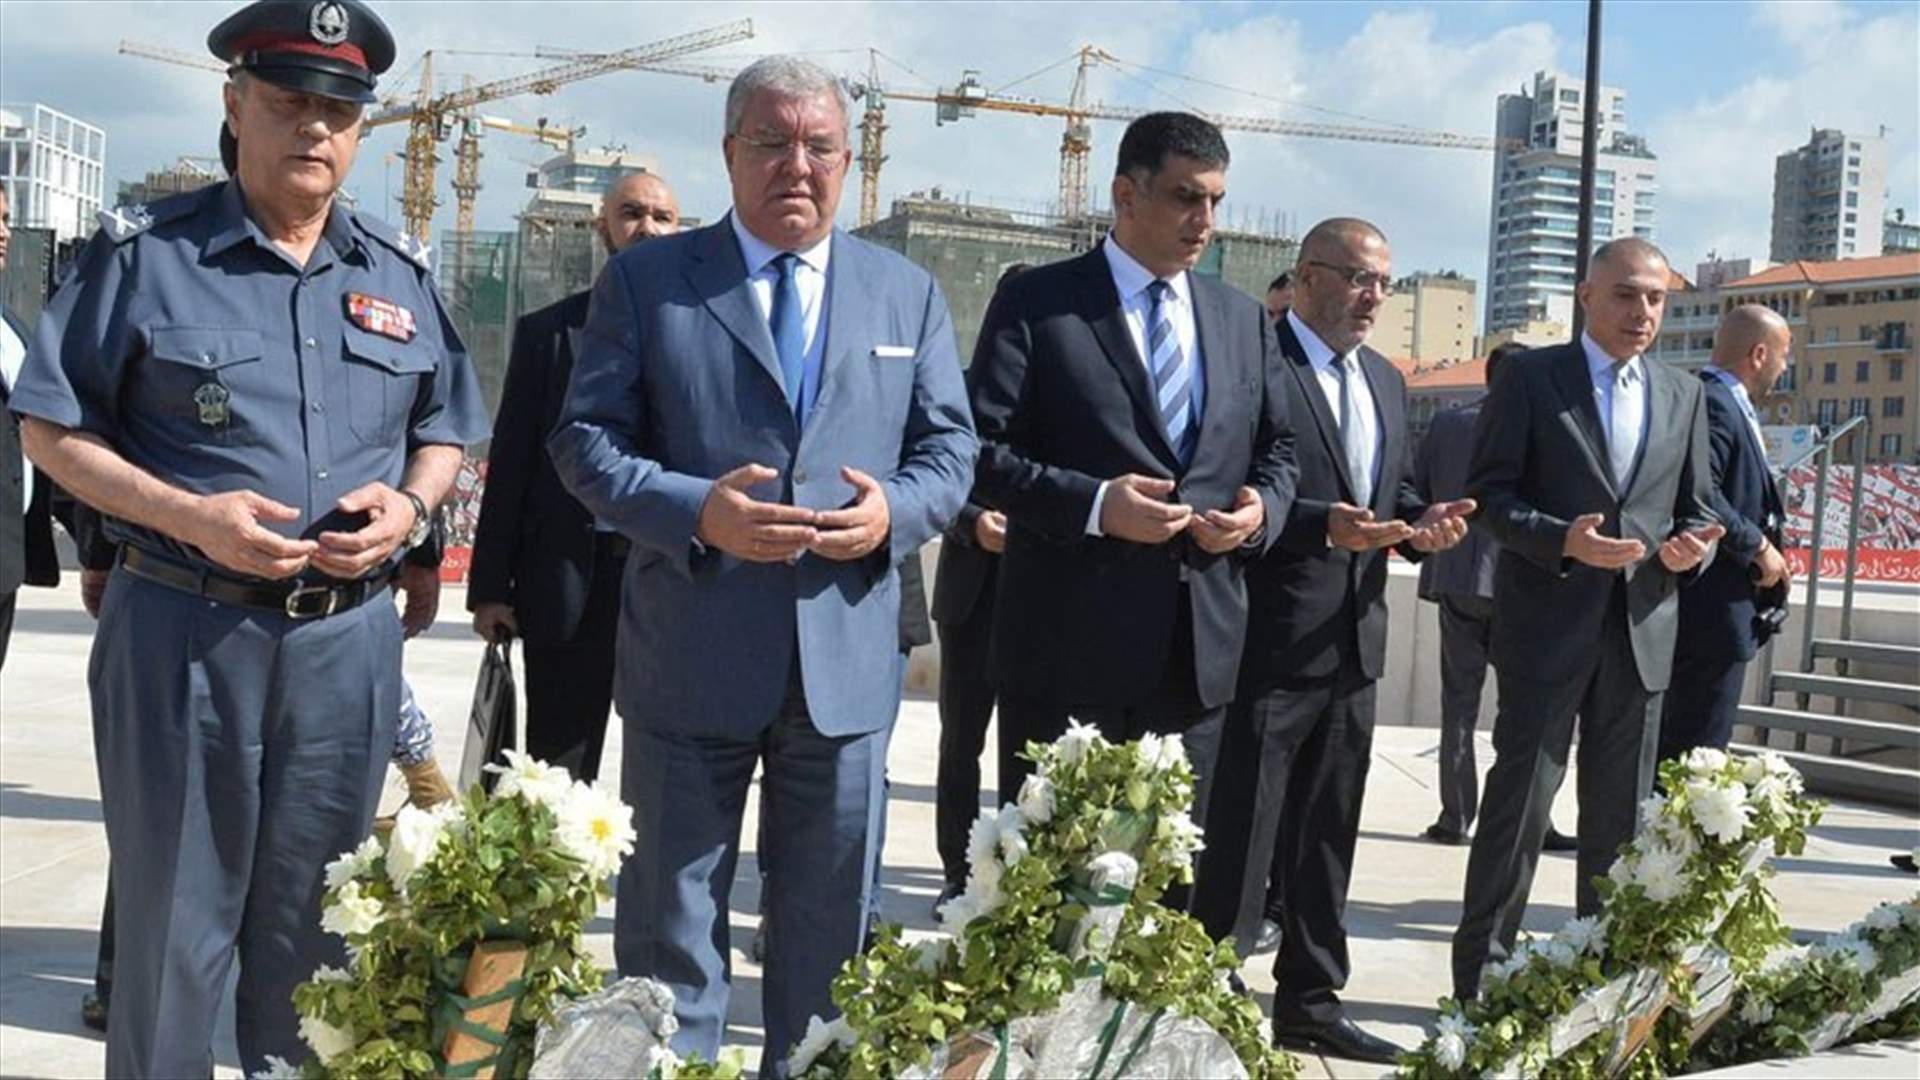 Lebanese officials commemorate 4th anniversary of Wissam al-Hasan assassination 